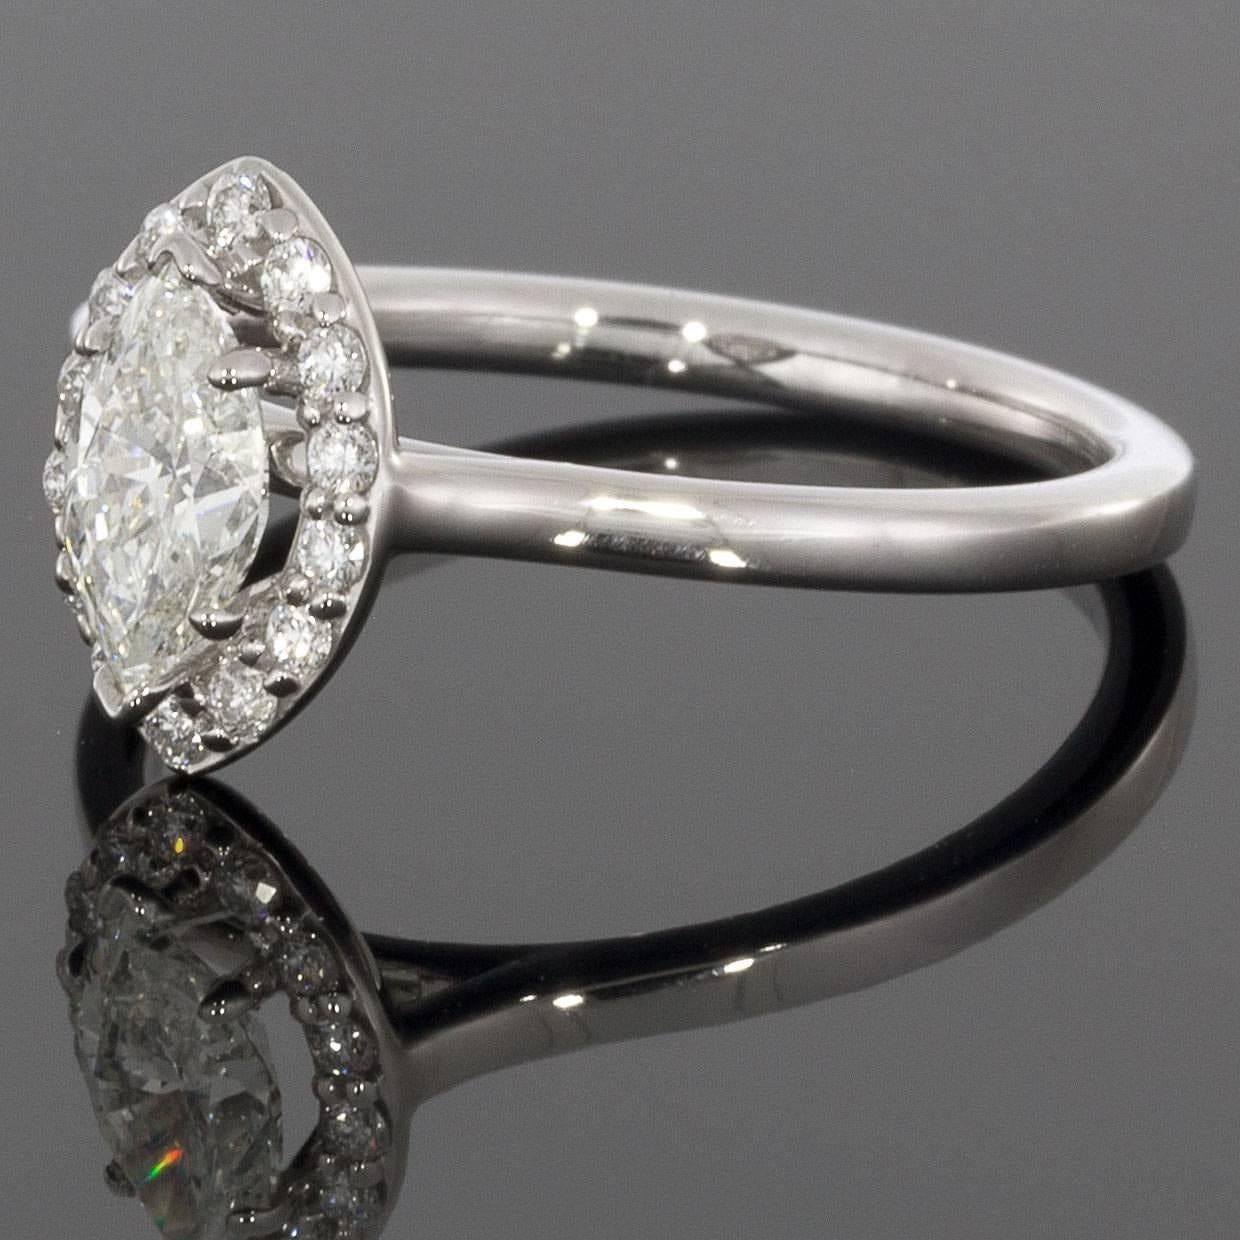 Marquise brilliant cut diamonds are a great option if you are looking for something unique that maximizes carat weight & elongates the finger. The center diamond in this beautiful engagement ring is a .57 carat marquise brilliant shape that grades